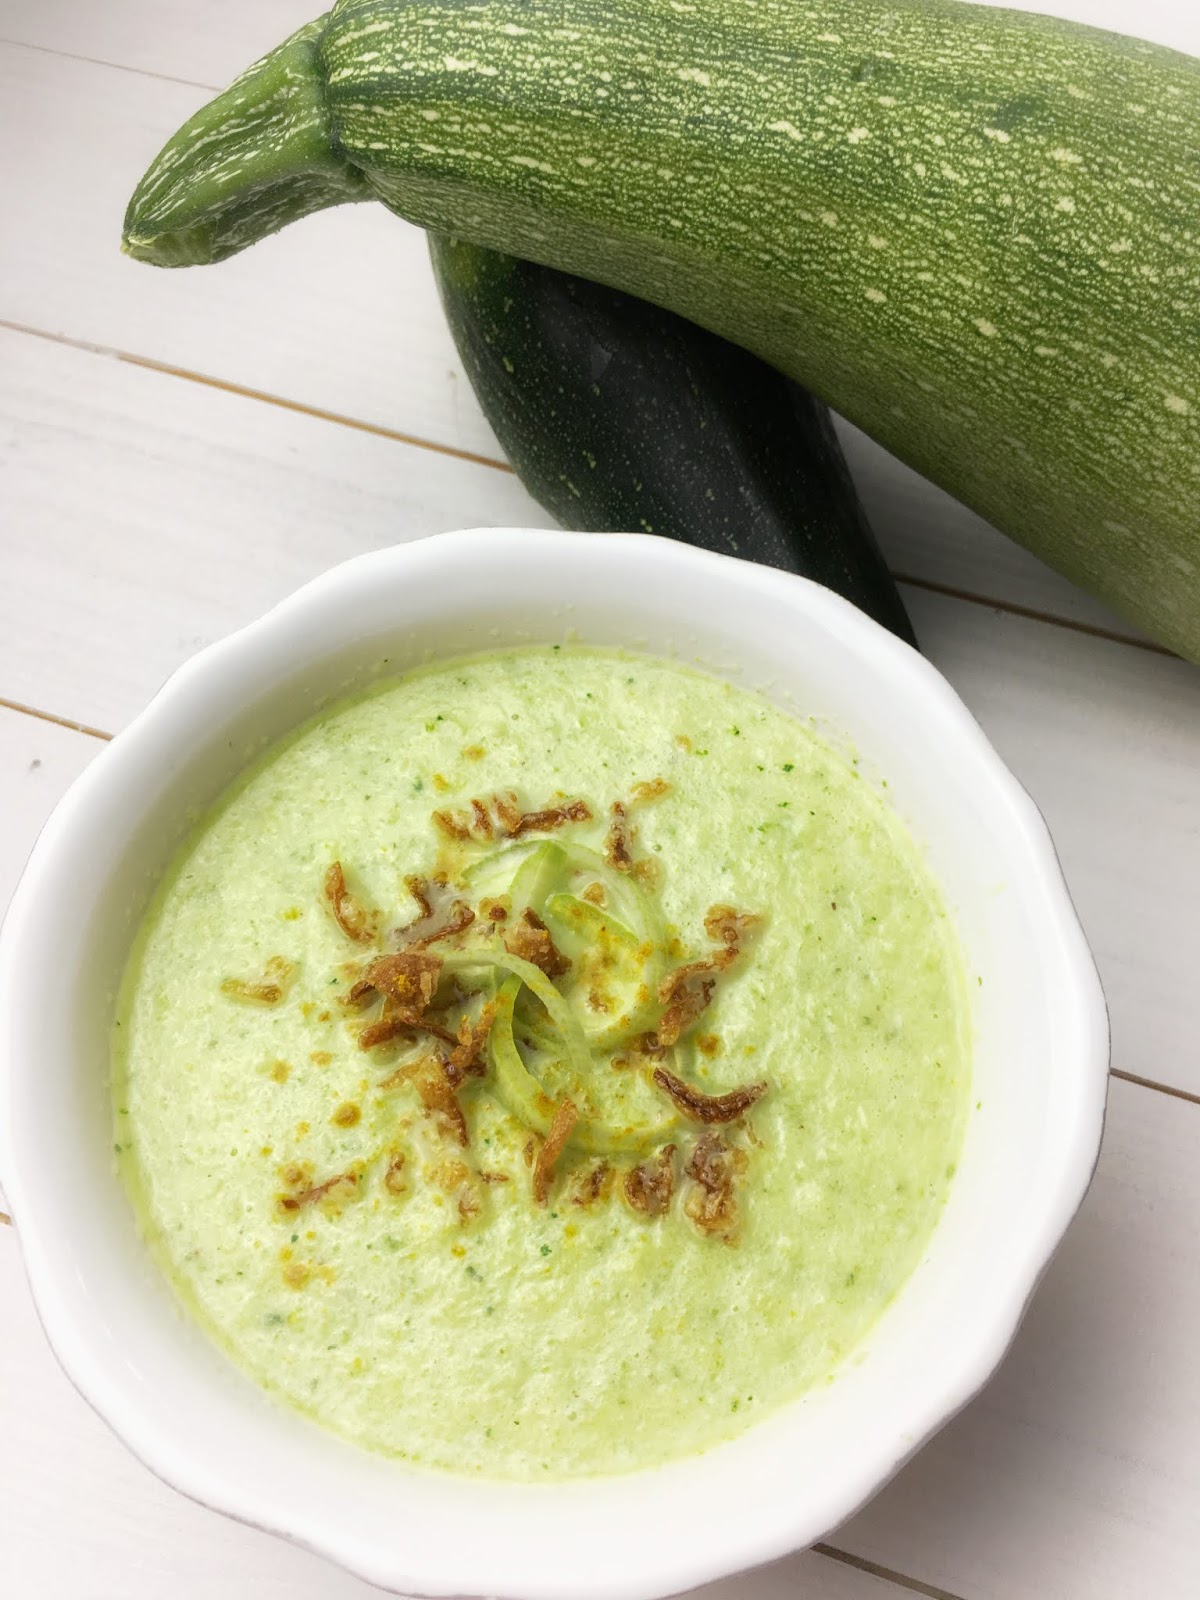 Family, Bakery &amp; More : Zucchini-Lauch-Suppe